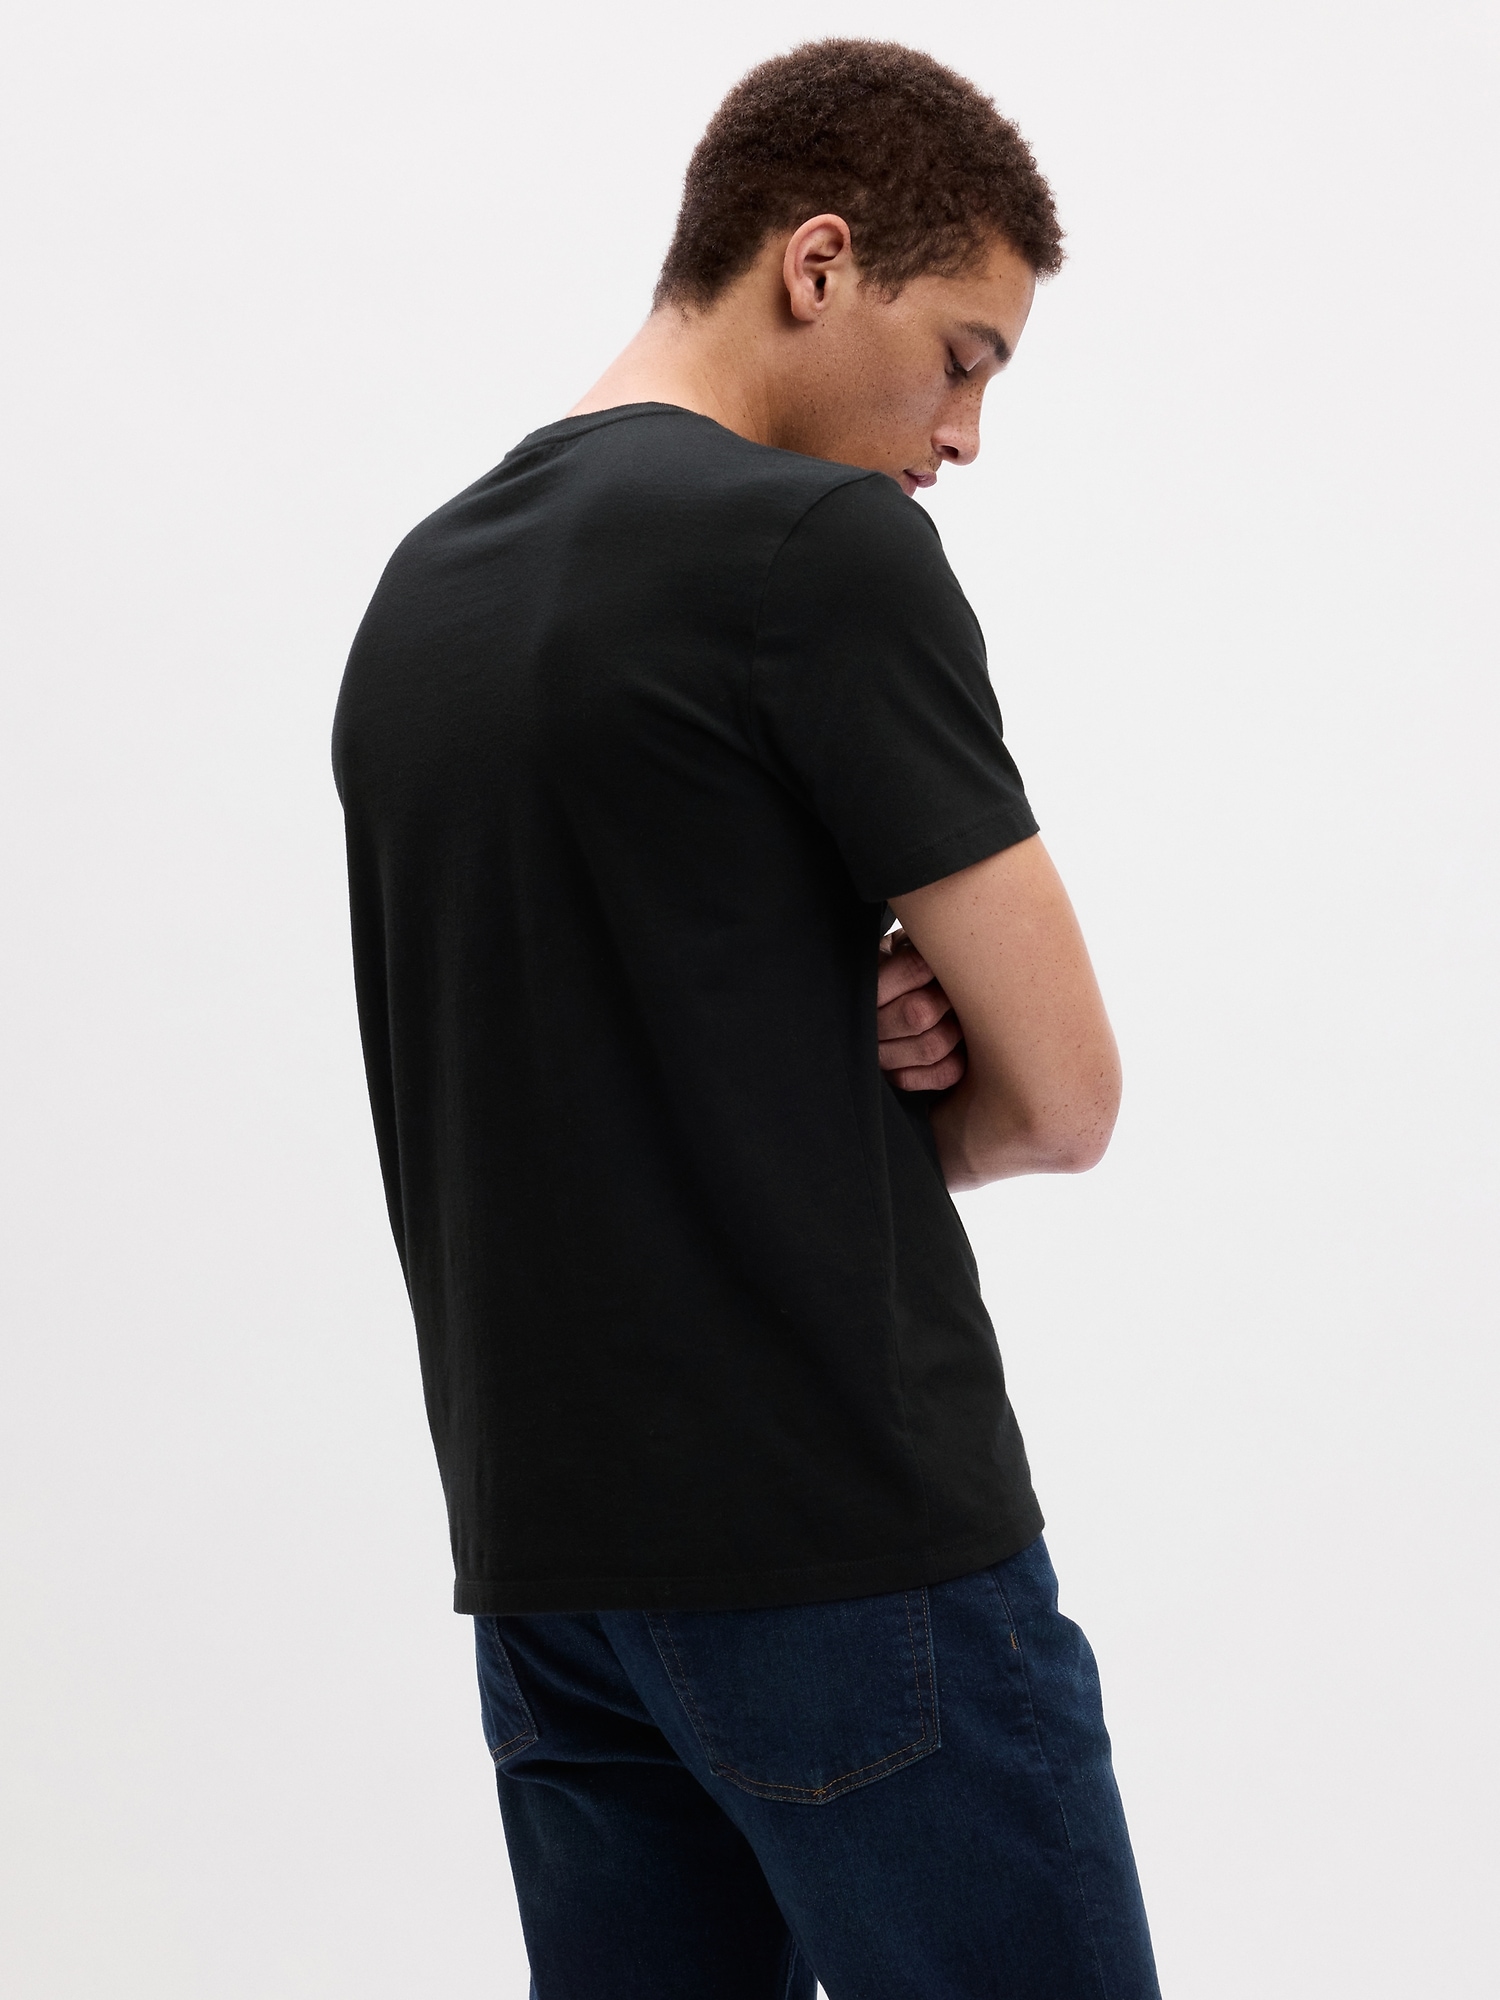 Premium Photo  Man in blank black t-shirt, front and back views